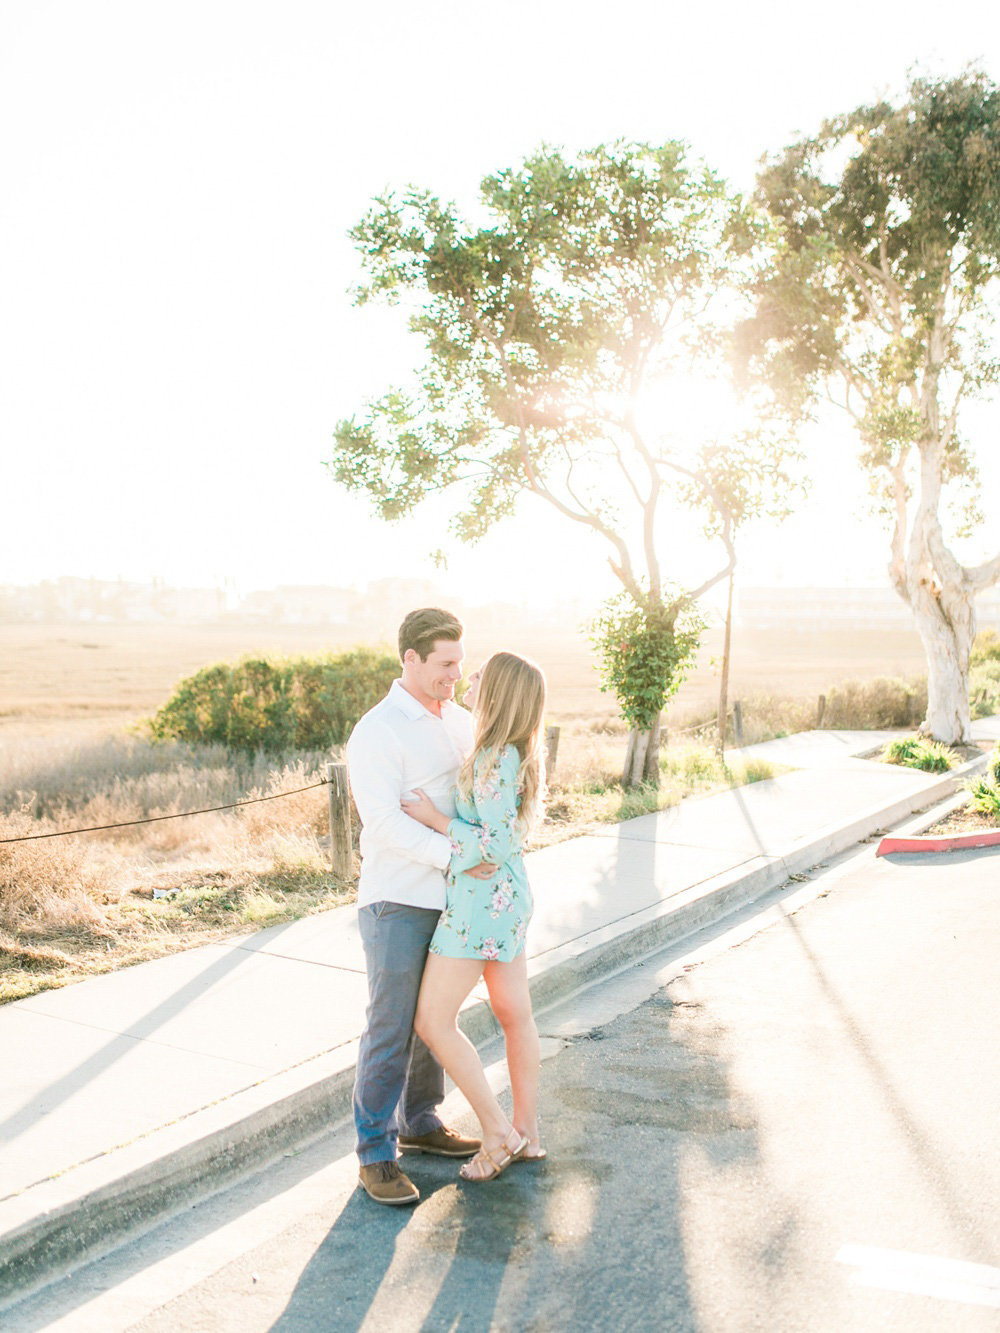 San-Diego-Engagement-Photographer-Mandy-Ford-001